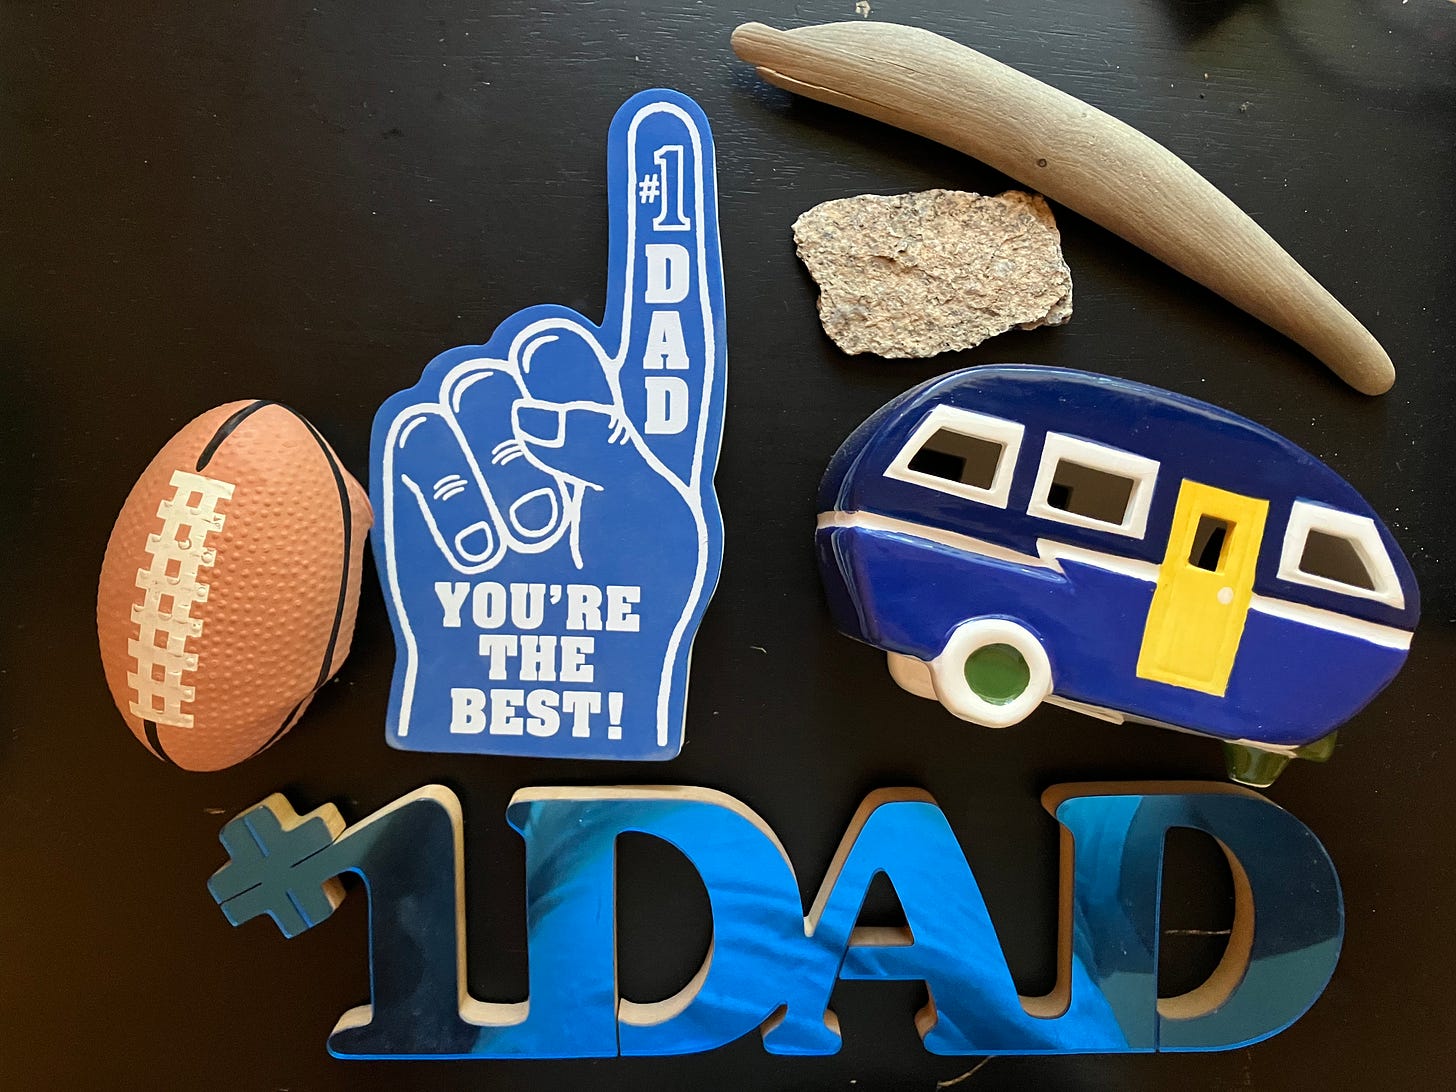 Images of #1 Dad, Your's the Best, Football, camping trailer, and rock and stick